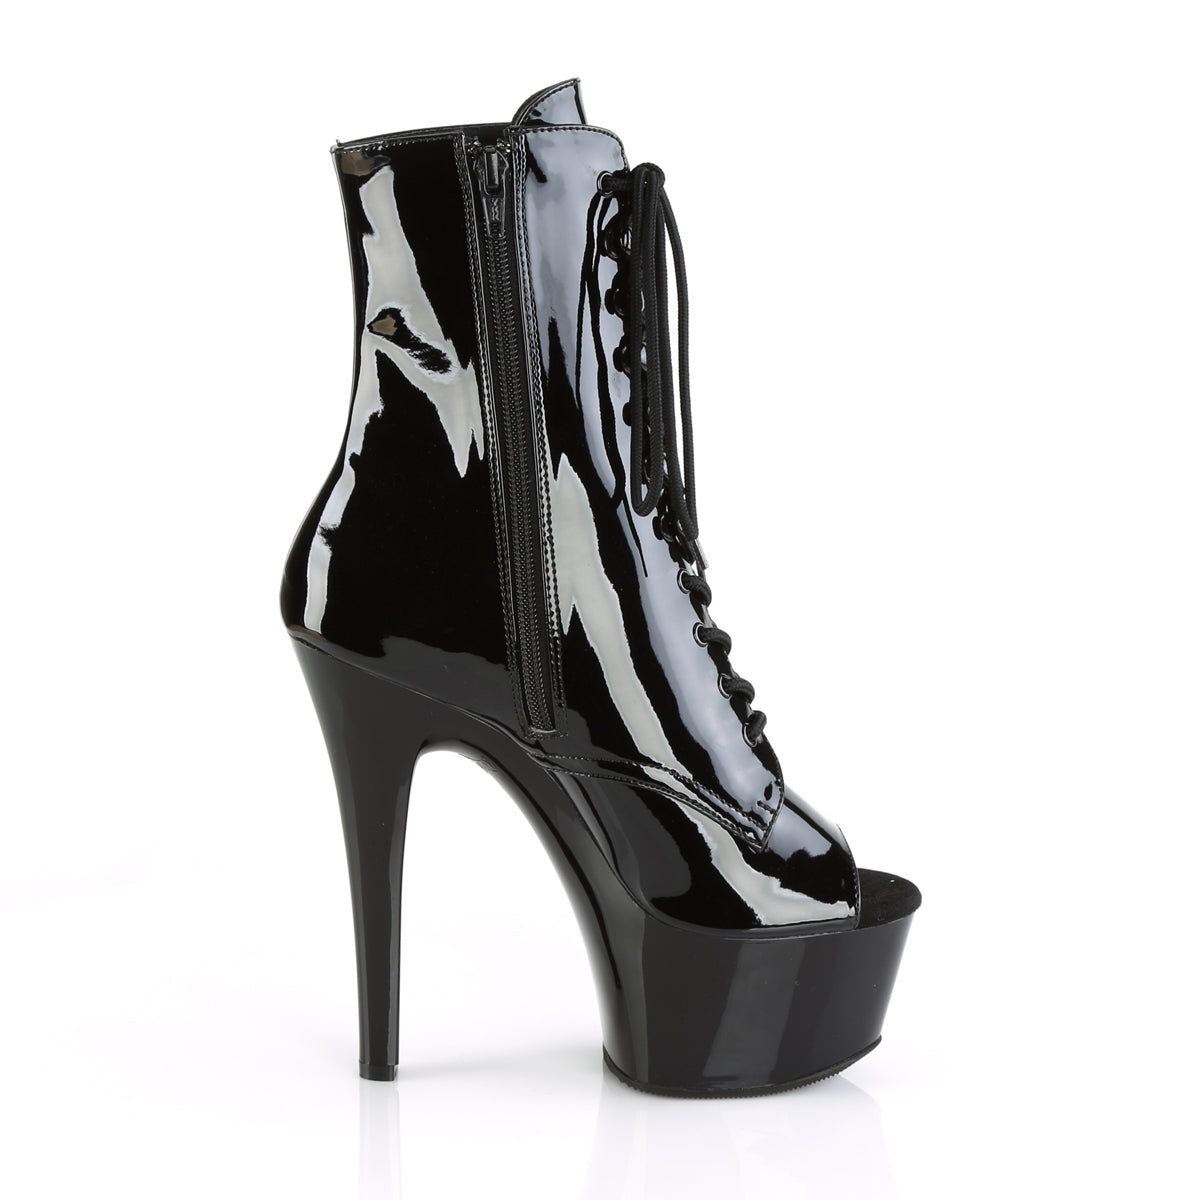 ASPIRE-1021 Pleasers 6" Heel Black Patent Sexy Ankle Boots-Pleaser- Sexy Shoes Fetish Heels